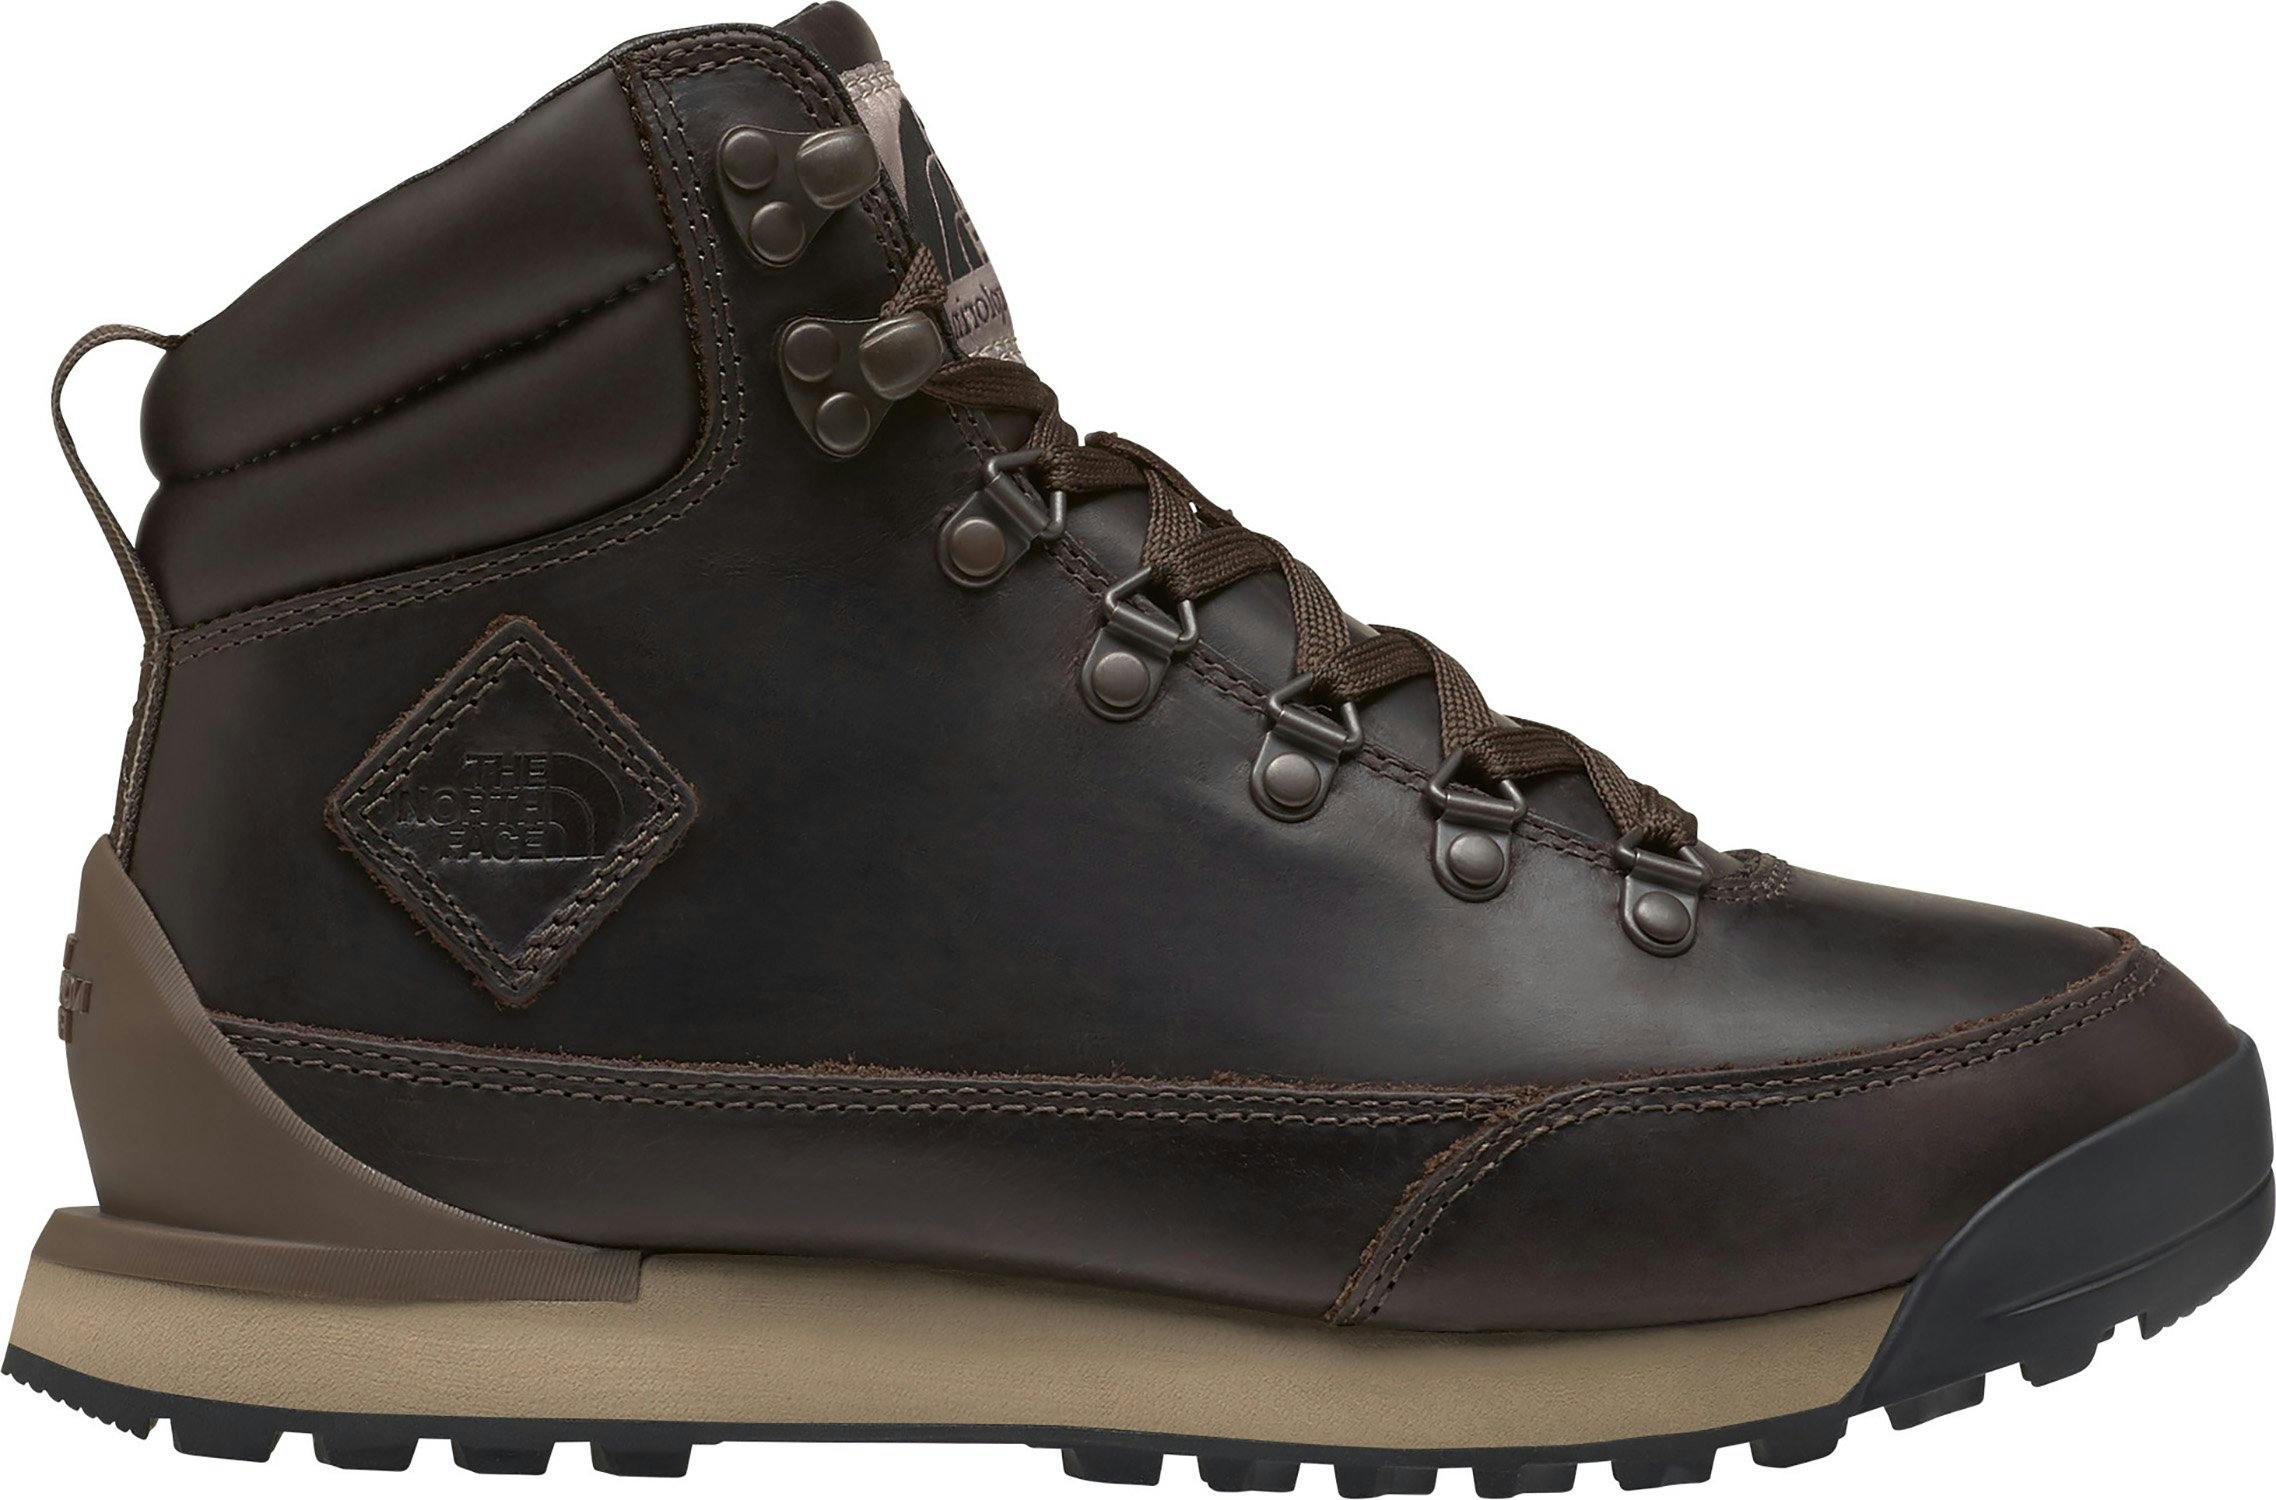 Product image for Back-To-Berkeley IV Regen Leather Boots - Women’s 